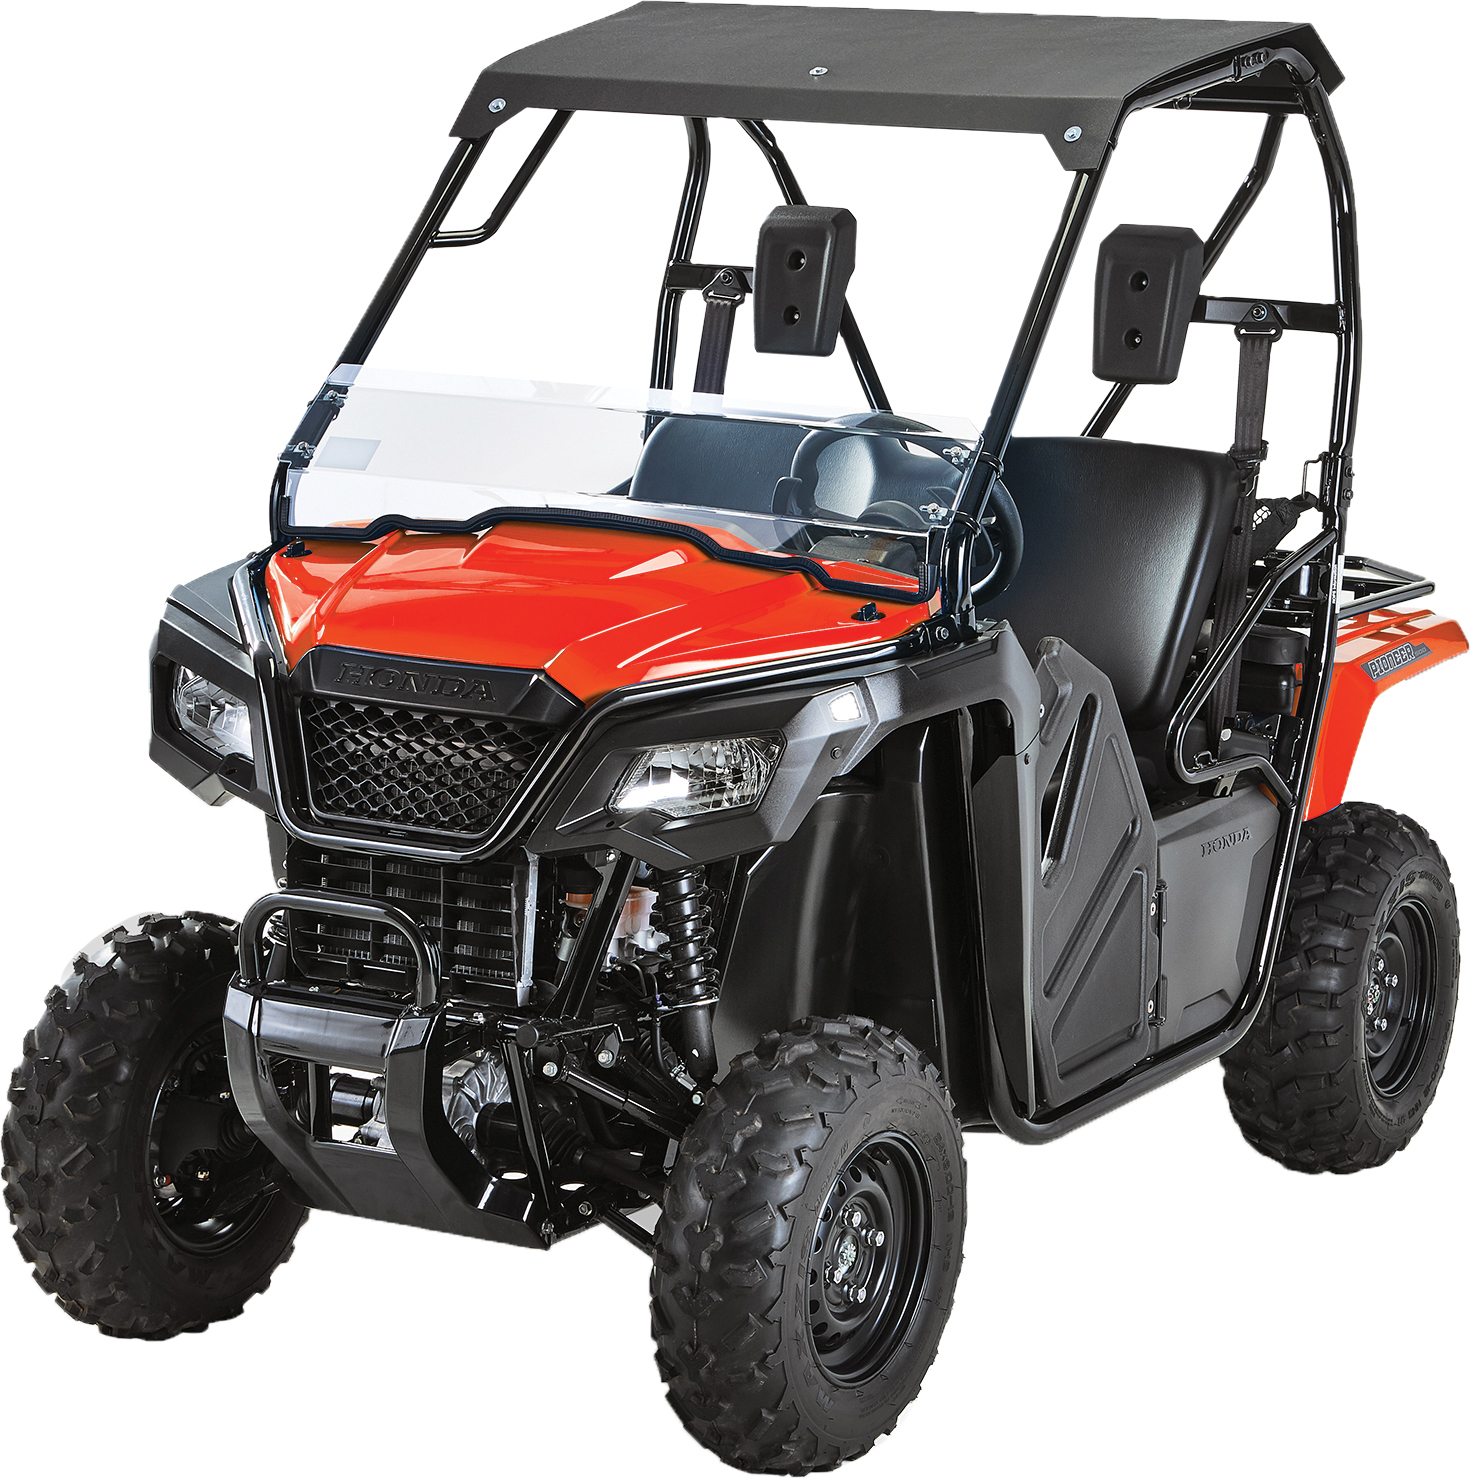 Half Windshield - For 15-17 Honda SXS500M2 Pioneer - Click Image to Close